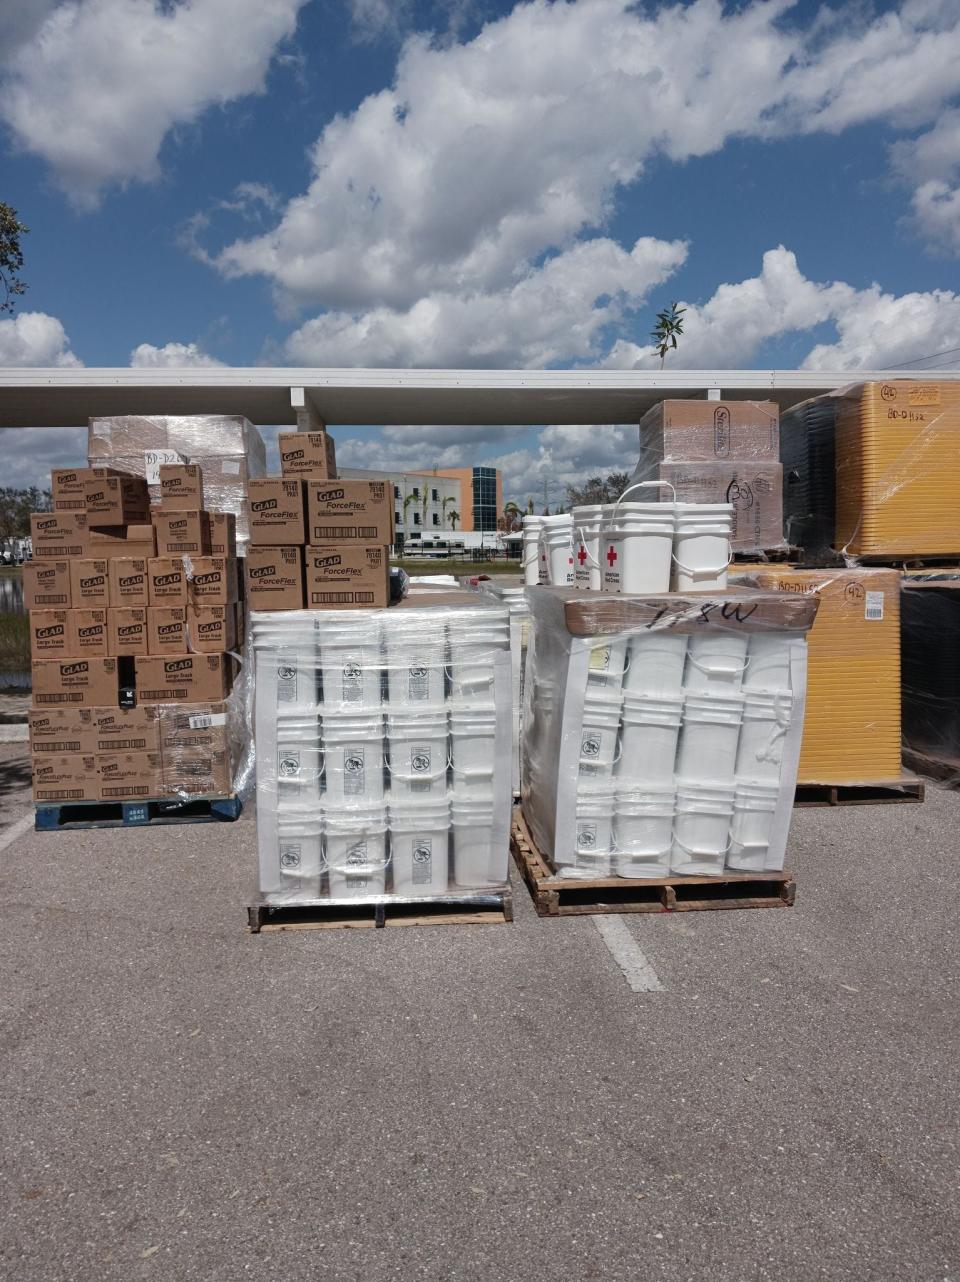 At a FEMA camp in Fort Myers, Fla., supplies sit on palettes waiting to be loaded into moving trucks and delivered to communities where they are badly needed. New Bedford resident Anthony Lessa Jr., a longtime volunteer with the Red Cross, was called down to Florida in the wake of Hurricane Ian, which hit Florida on Sept. 28. Lessa arrived on Oct. 1.